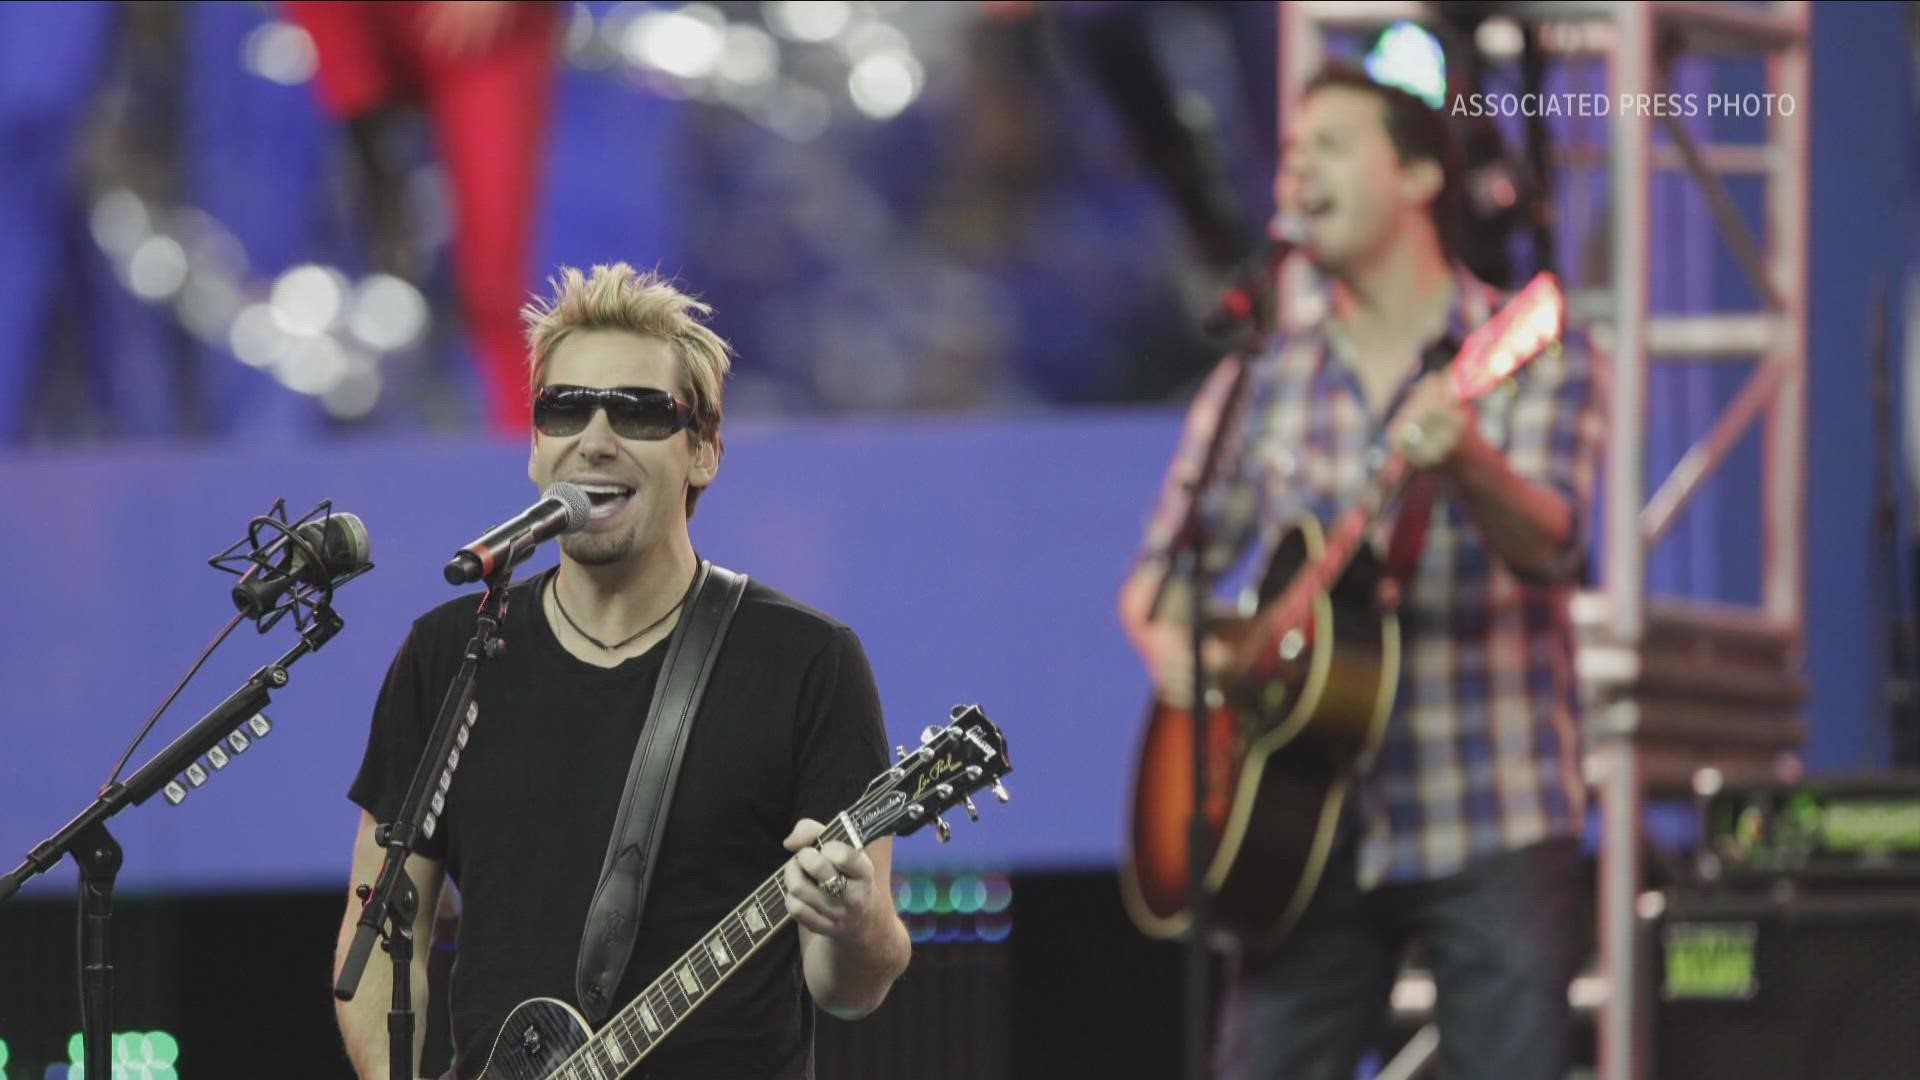 Nickelback coming to Darien Lake on August 16th